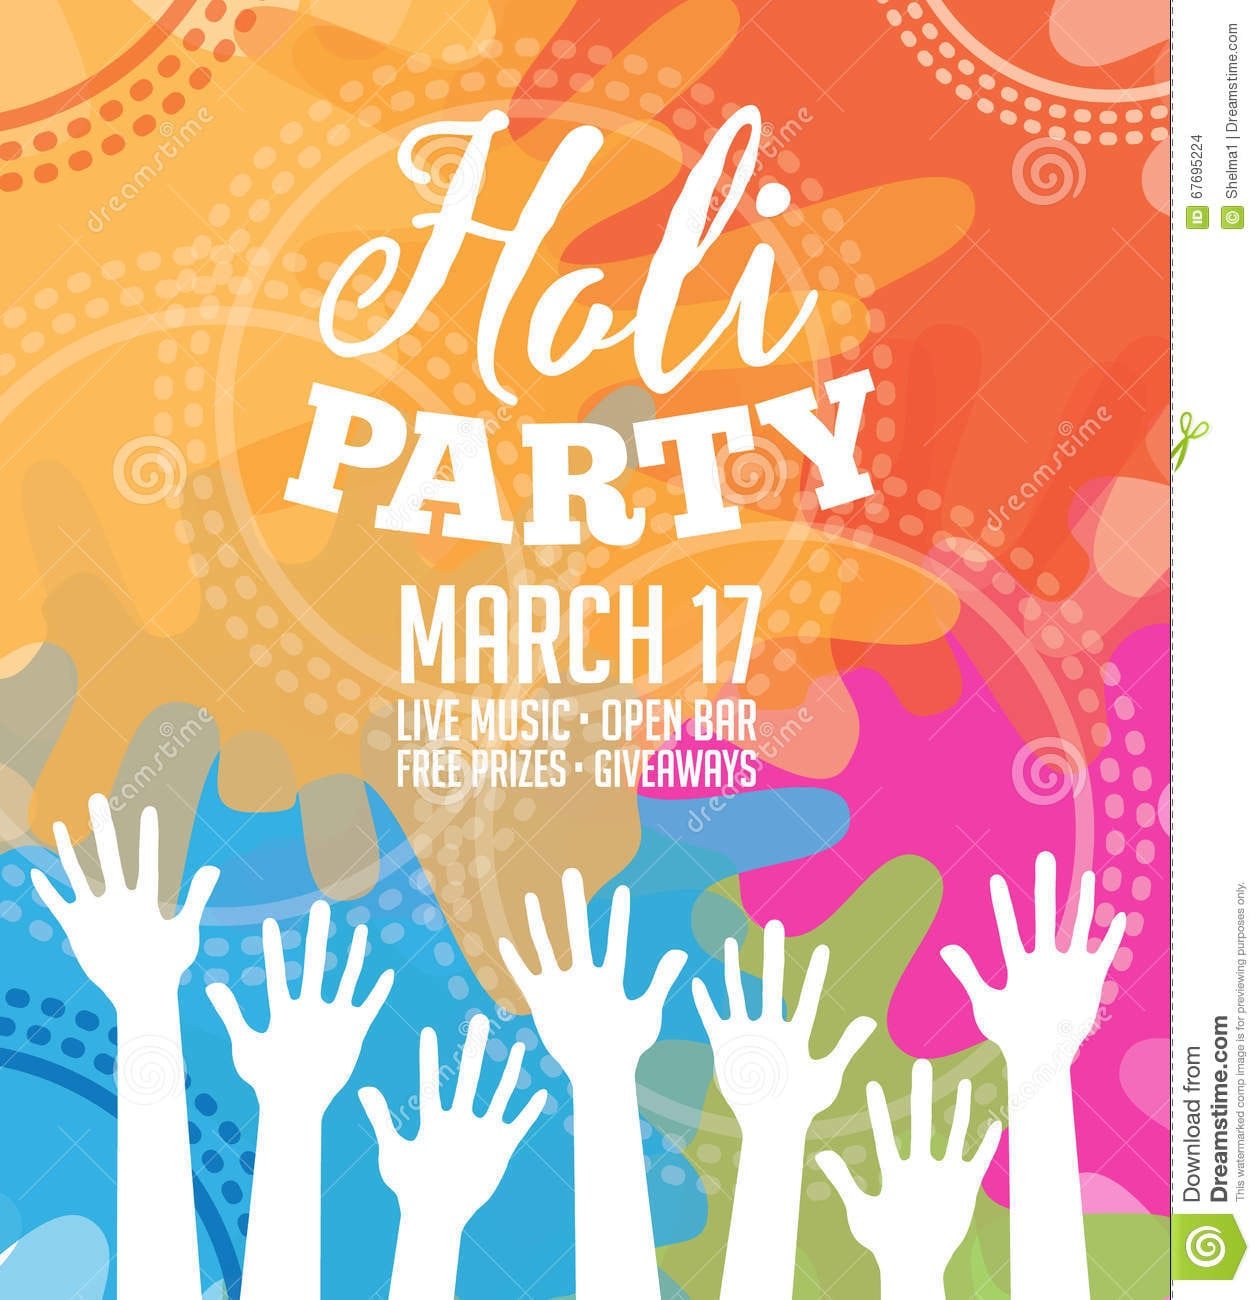 Holi Party Invitation Poster Greeting Card Design  Stock Vector